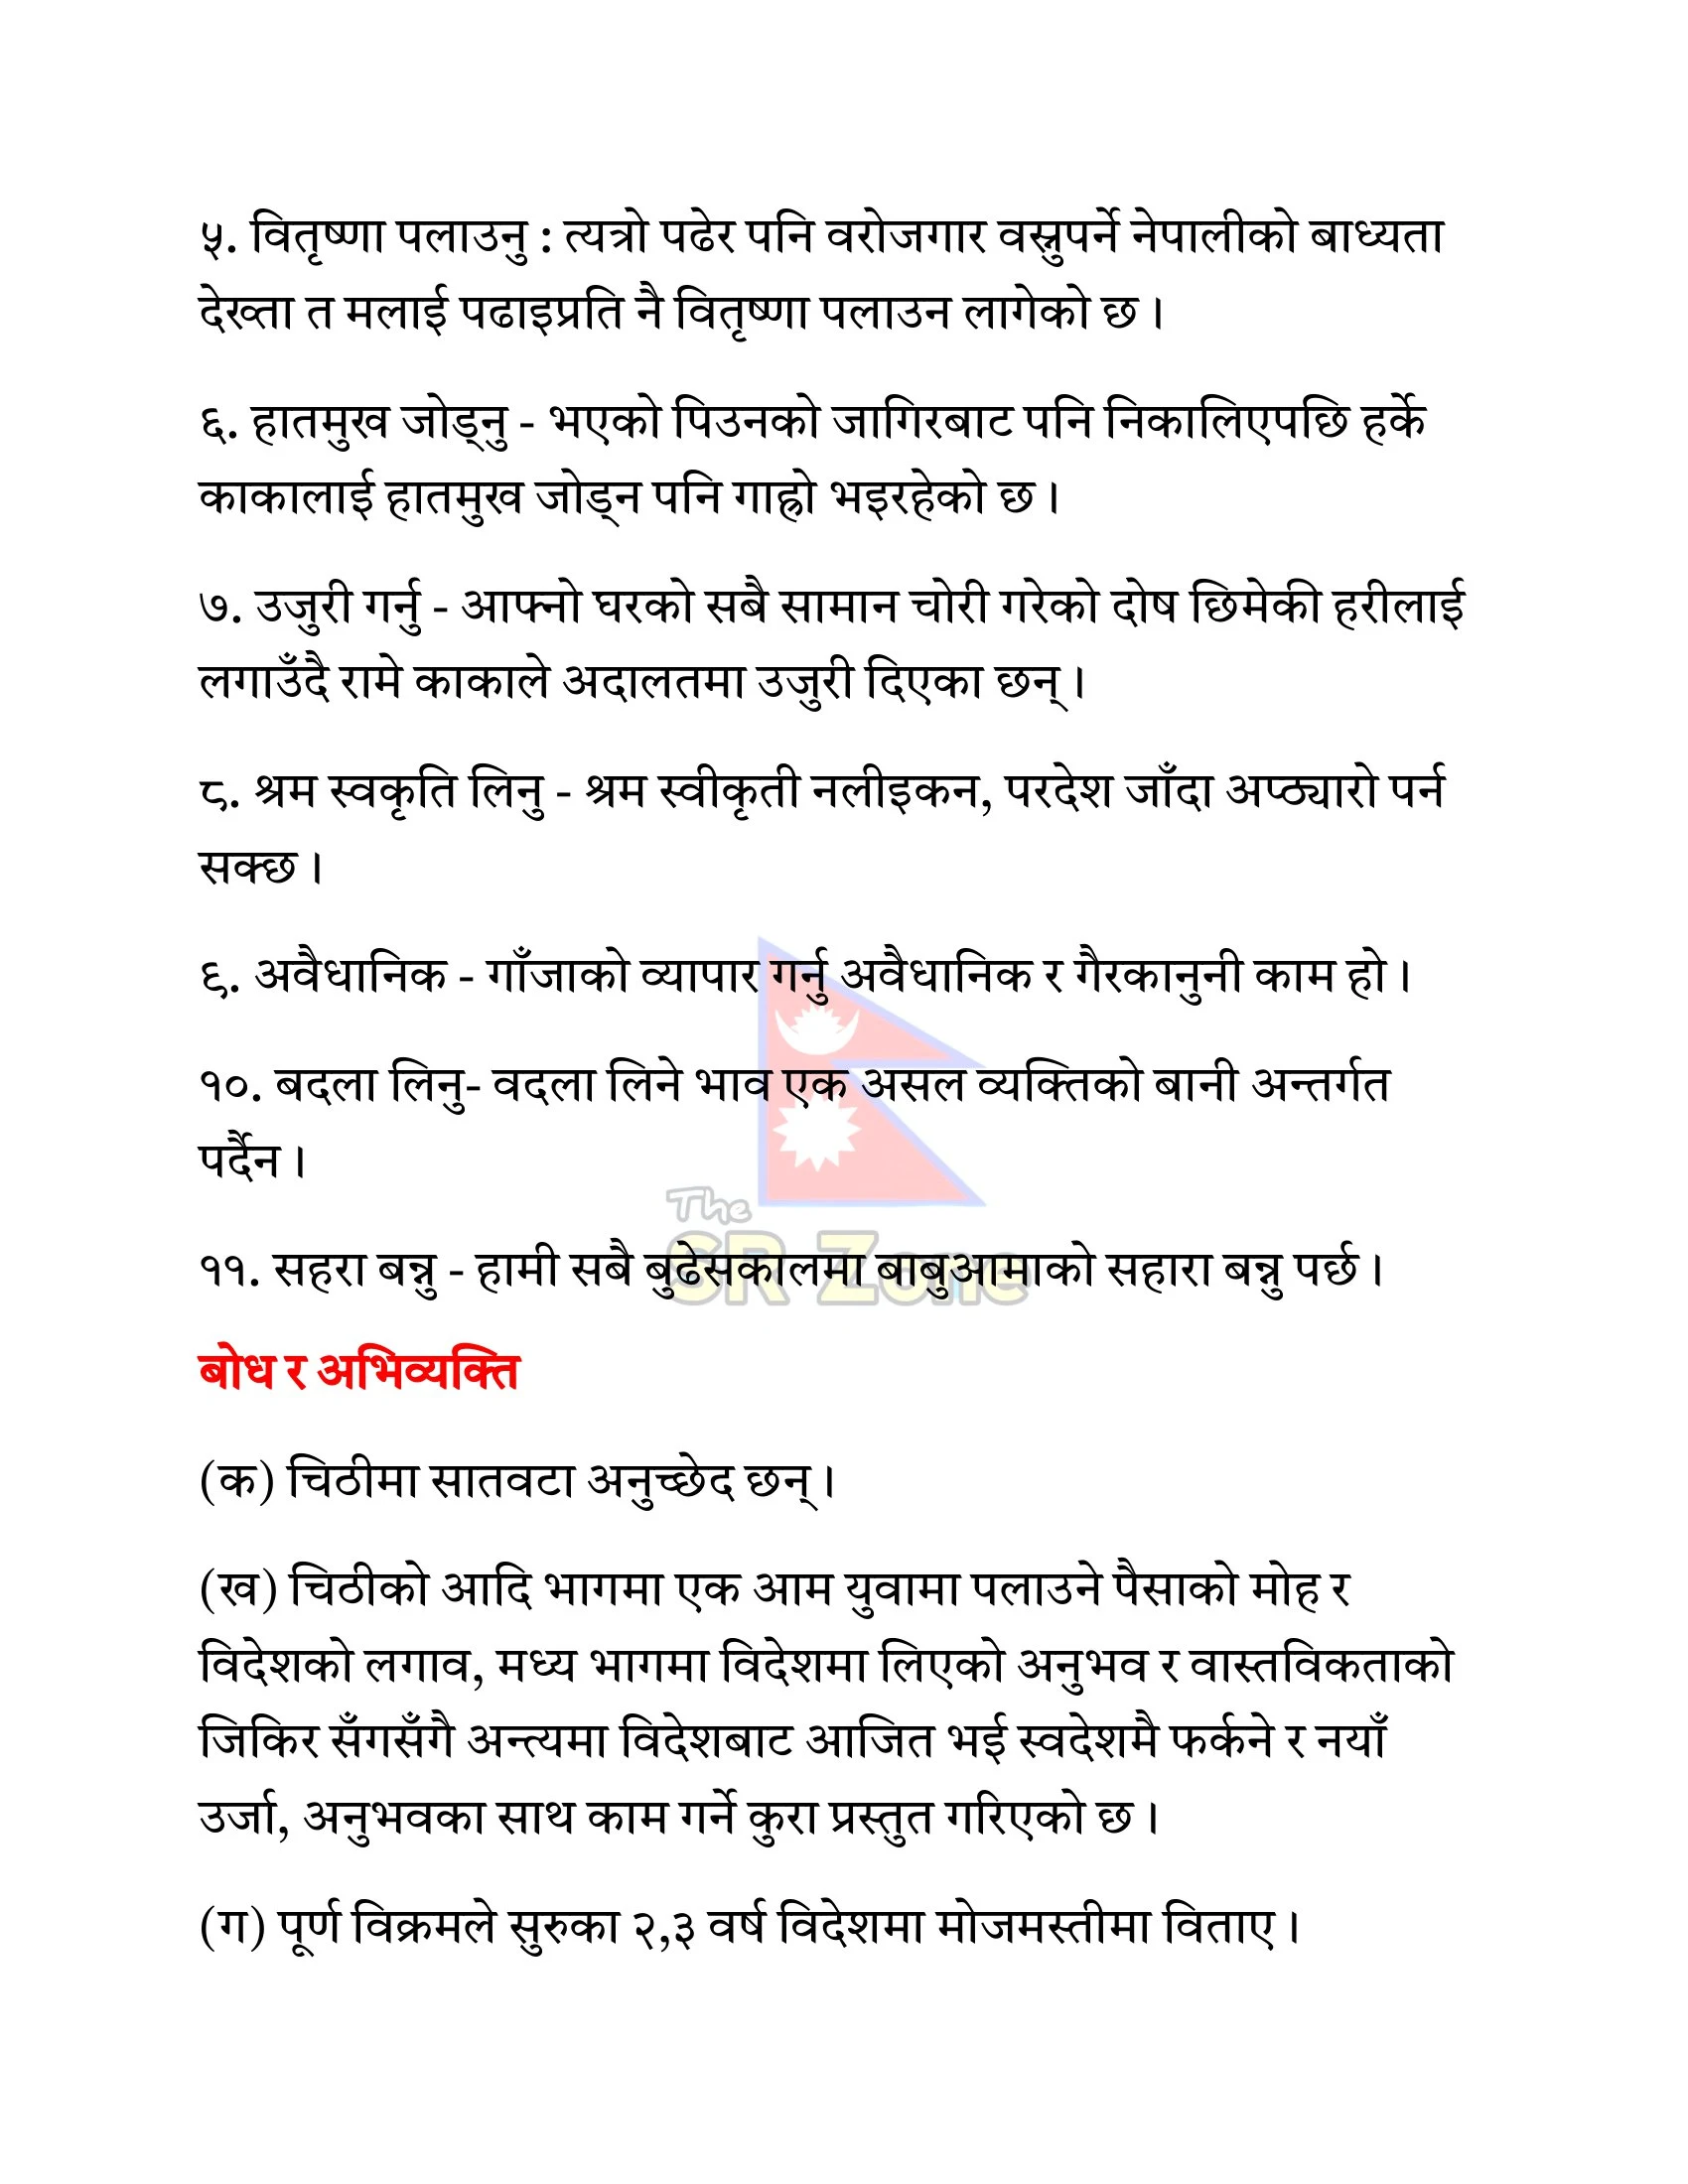 Sathi lai Chithi Exercise PDF : Class 11 Nepali Unit 5 Questions Answers